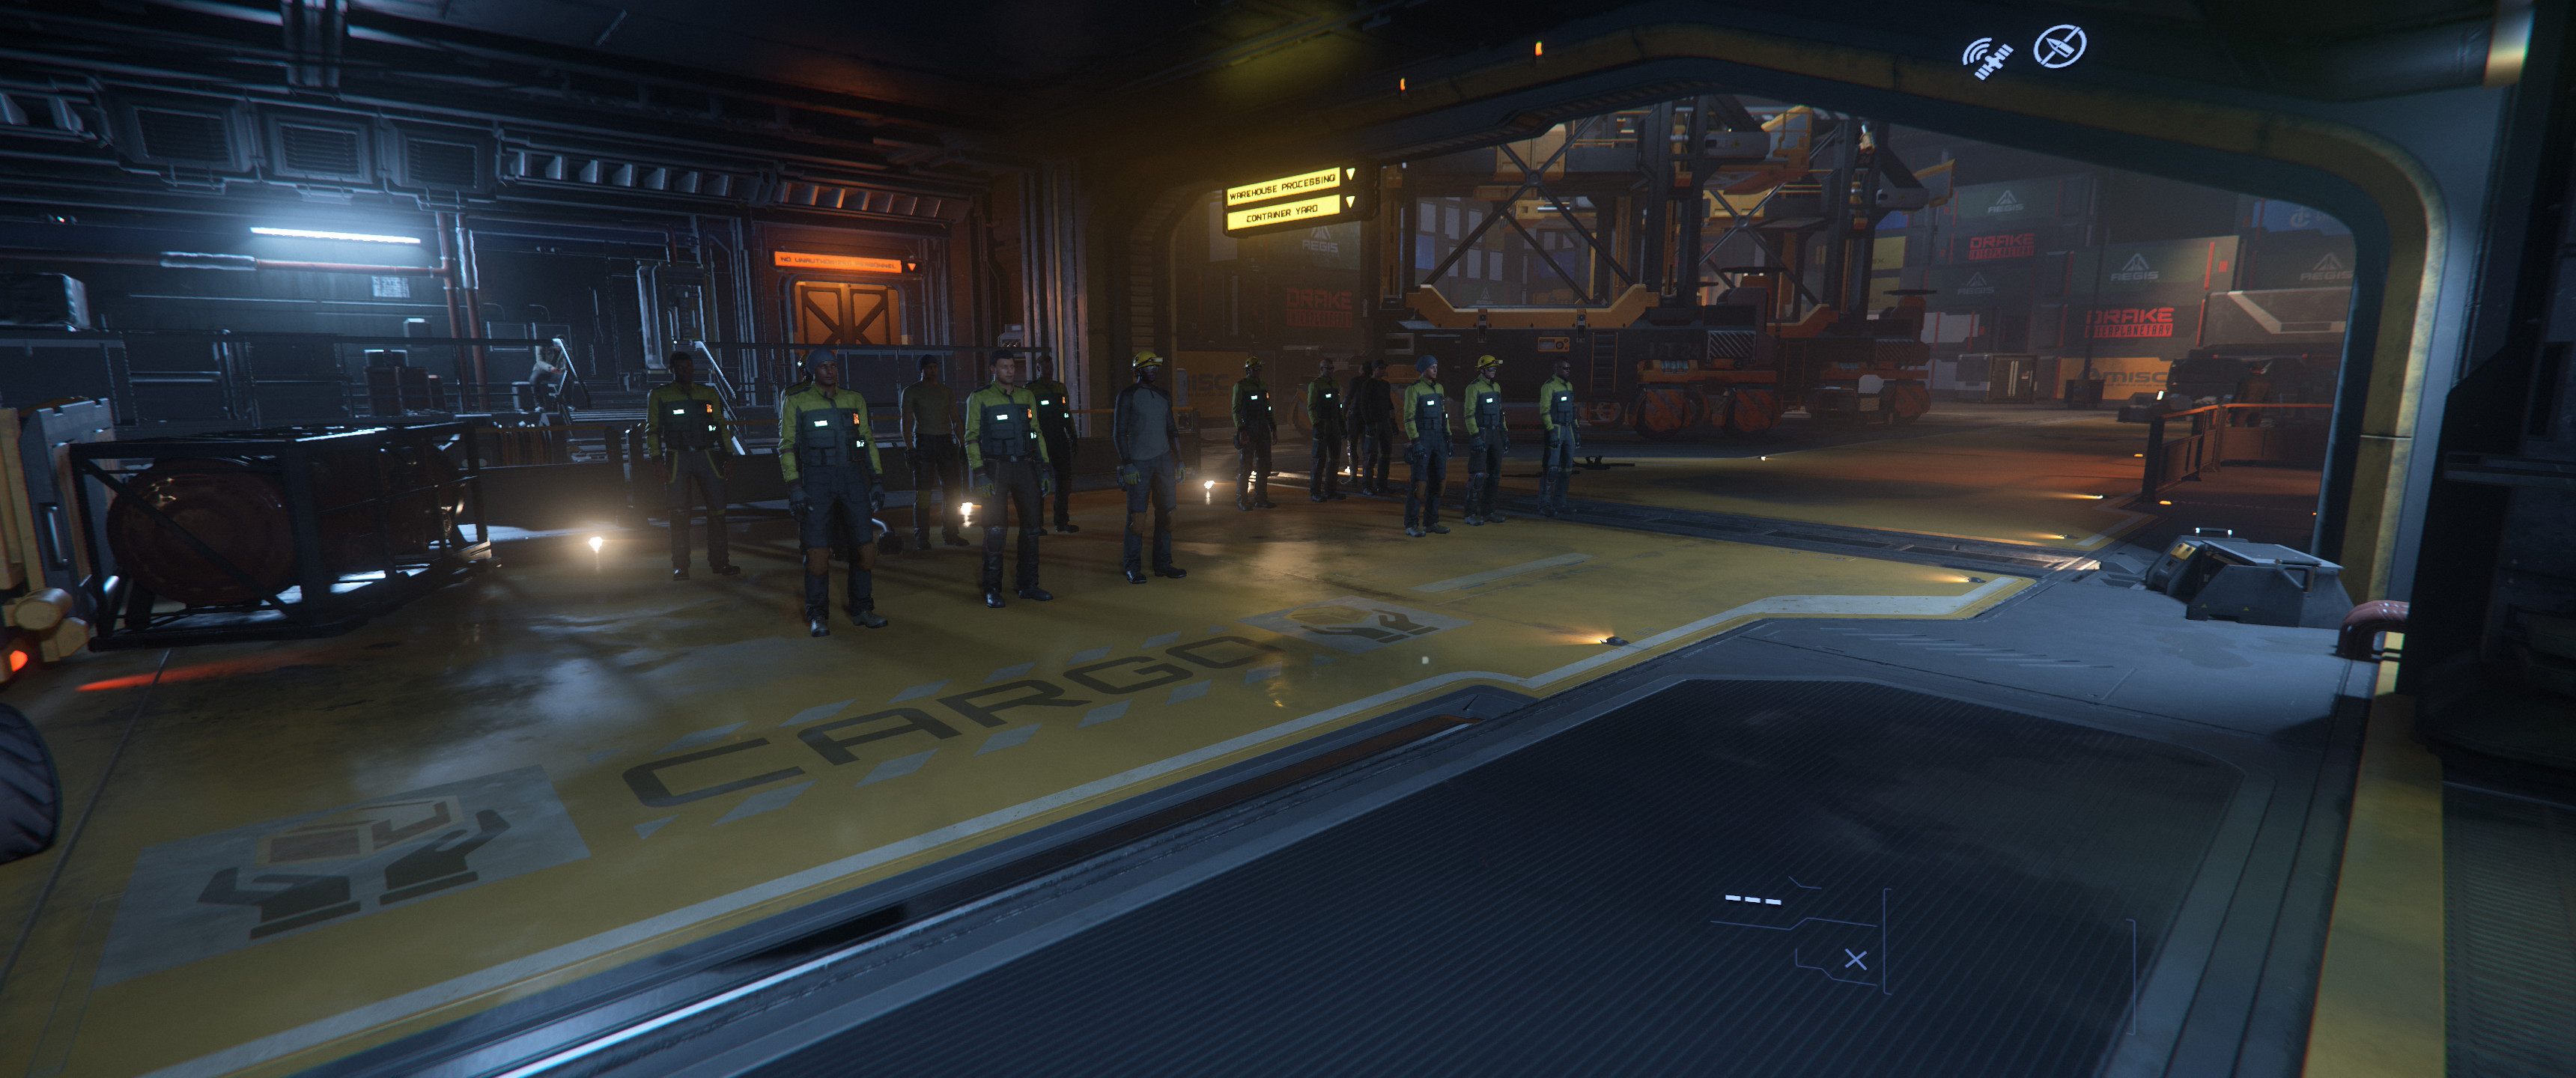 First-person view of a station interior, with “cargo” in big letters on the ground and a grid of fourteen workers in uniforms standing lifelessly, all facing the same direction